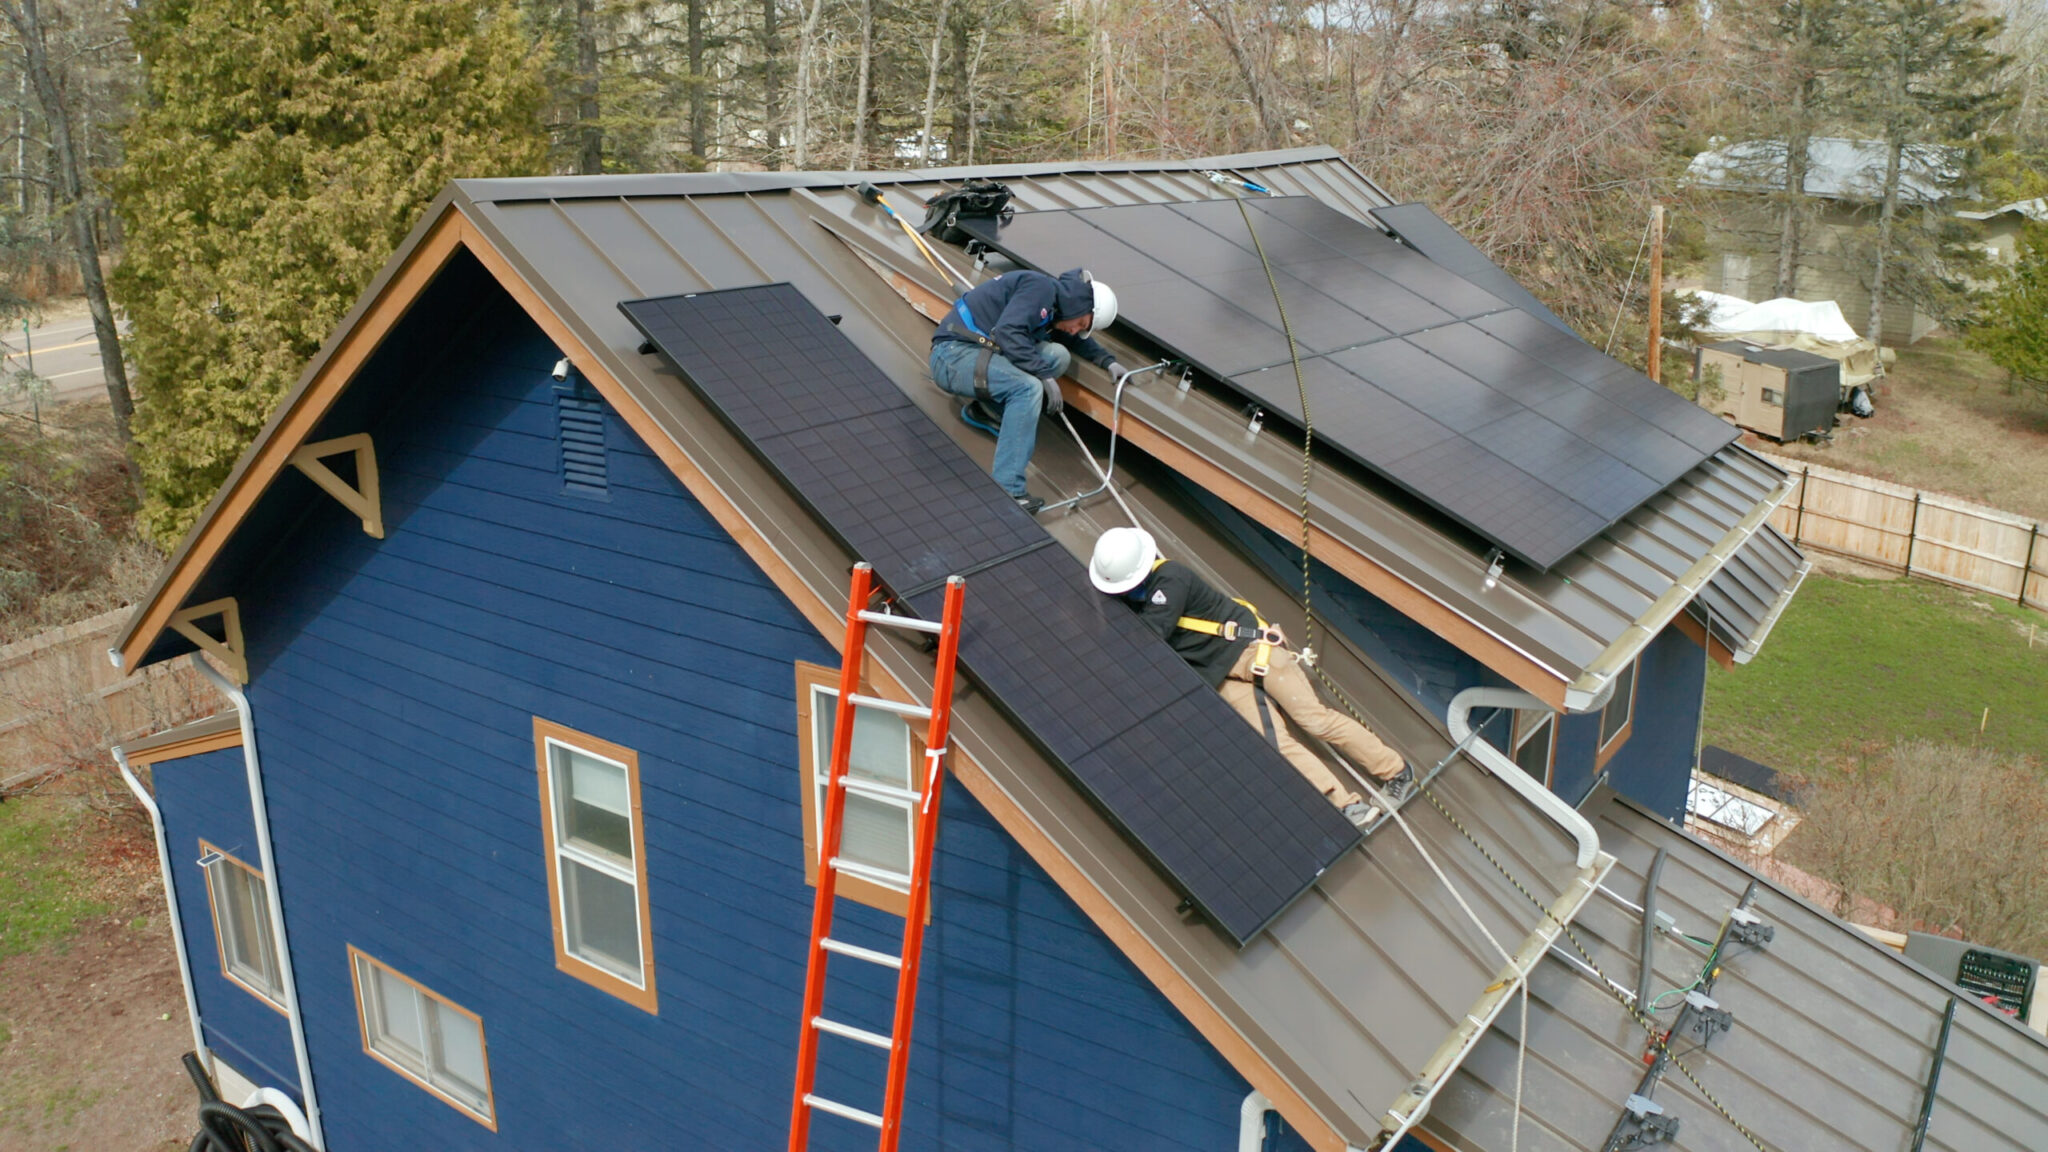 Two men installing wescom solar panels on a blue house. The family who owns the house will receive solar energy savings.